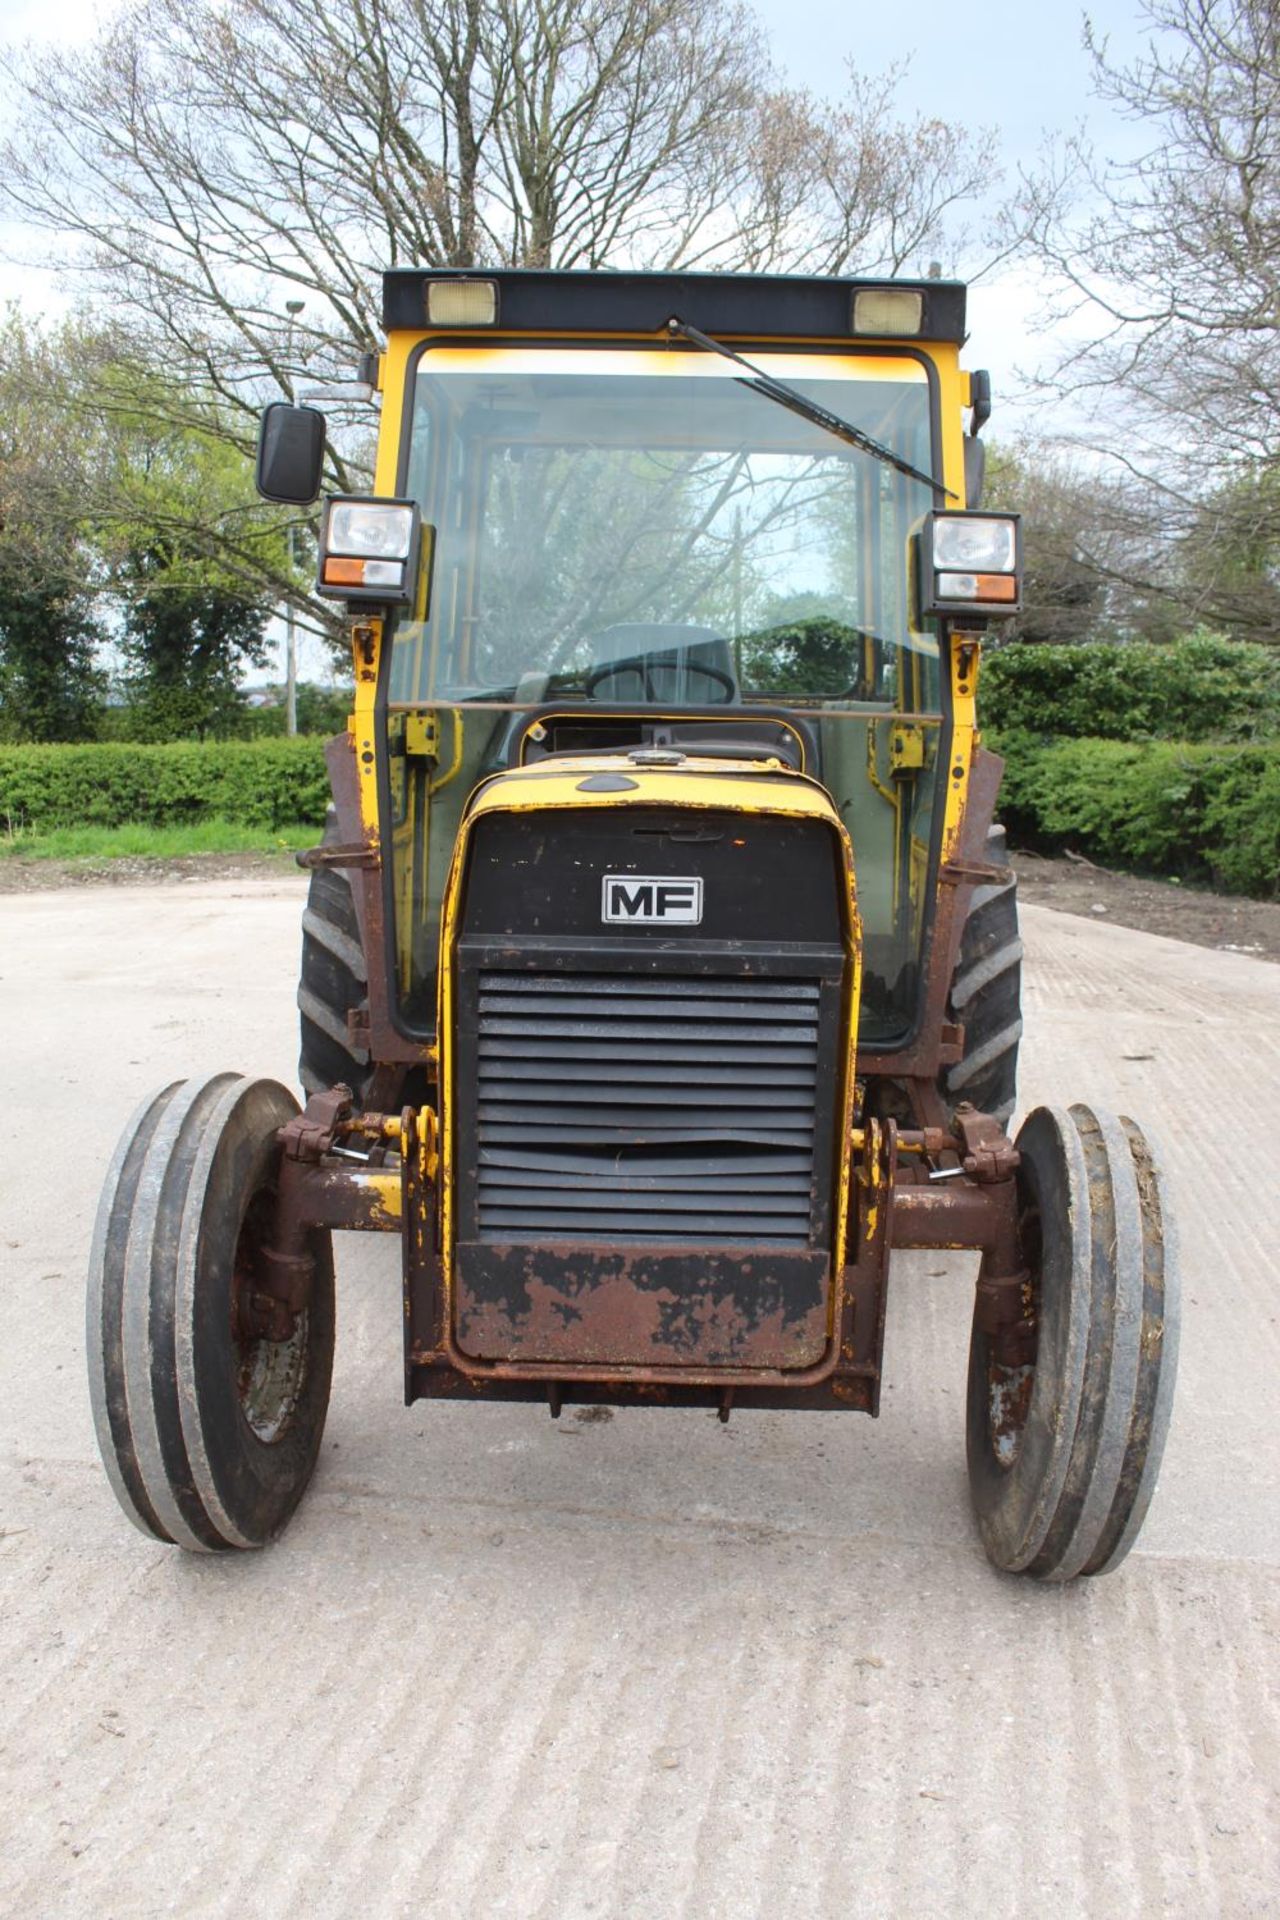 A MASSEY FERGUSON 20F 2WD INDUSTRIAL TRACTOR NO V5 SERIAL NUMBER 5101 C 0571 BELIEVED 1988 ONE OWNER - Image 3 of 9